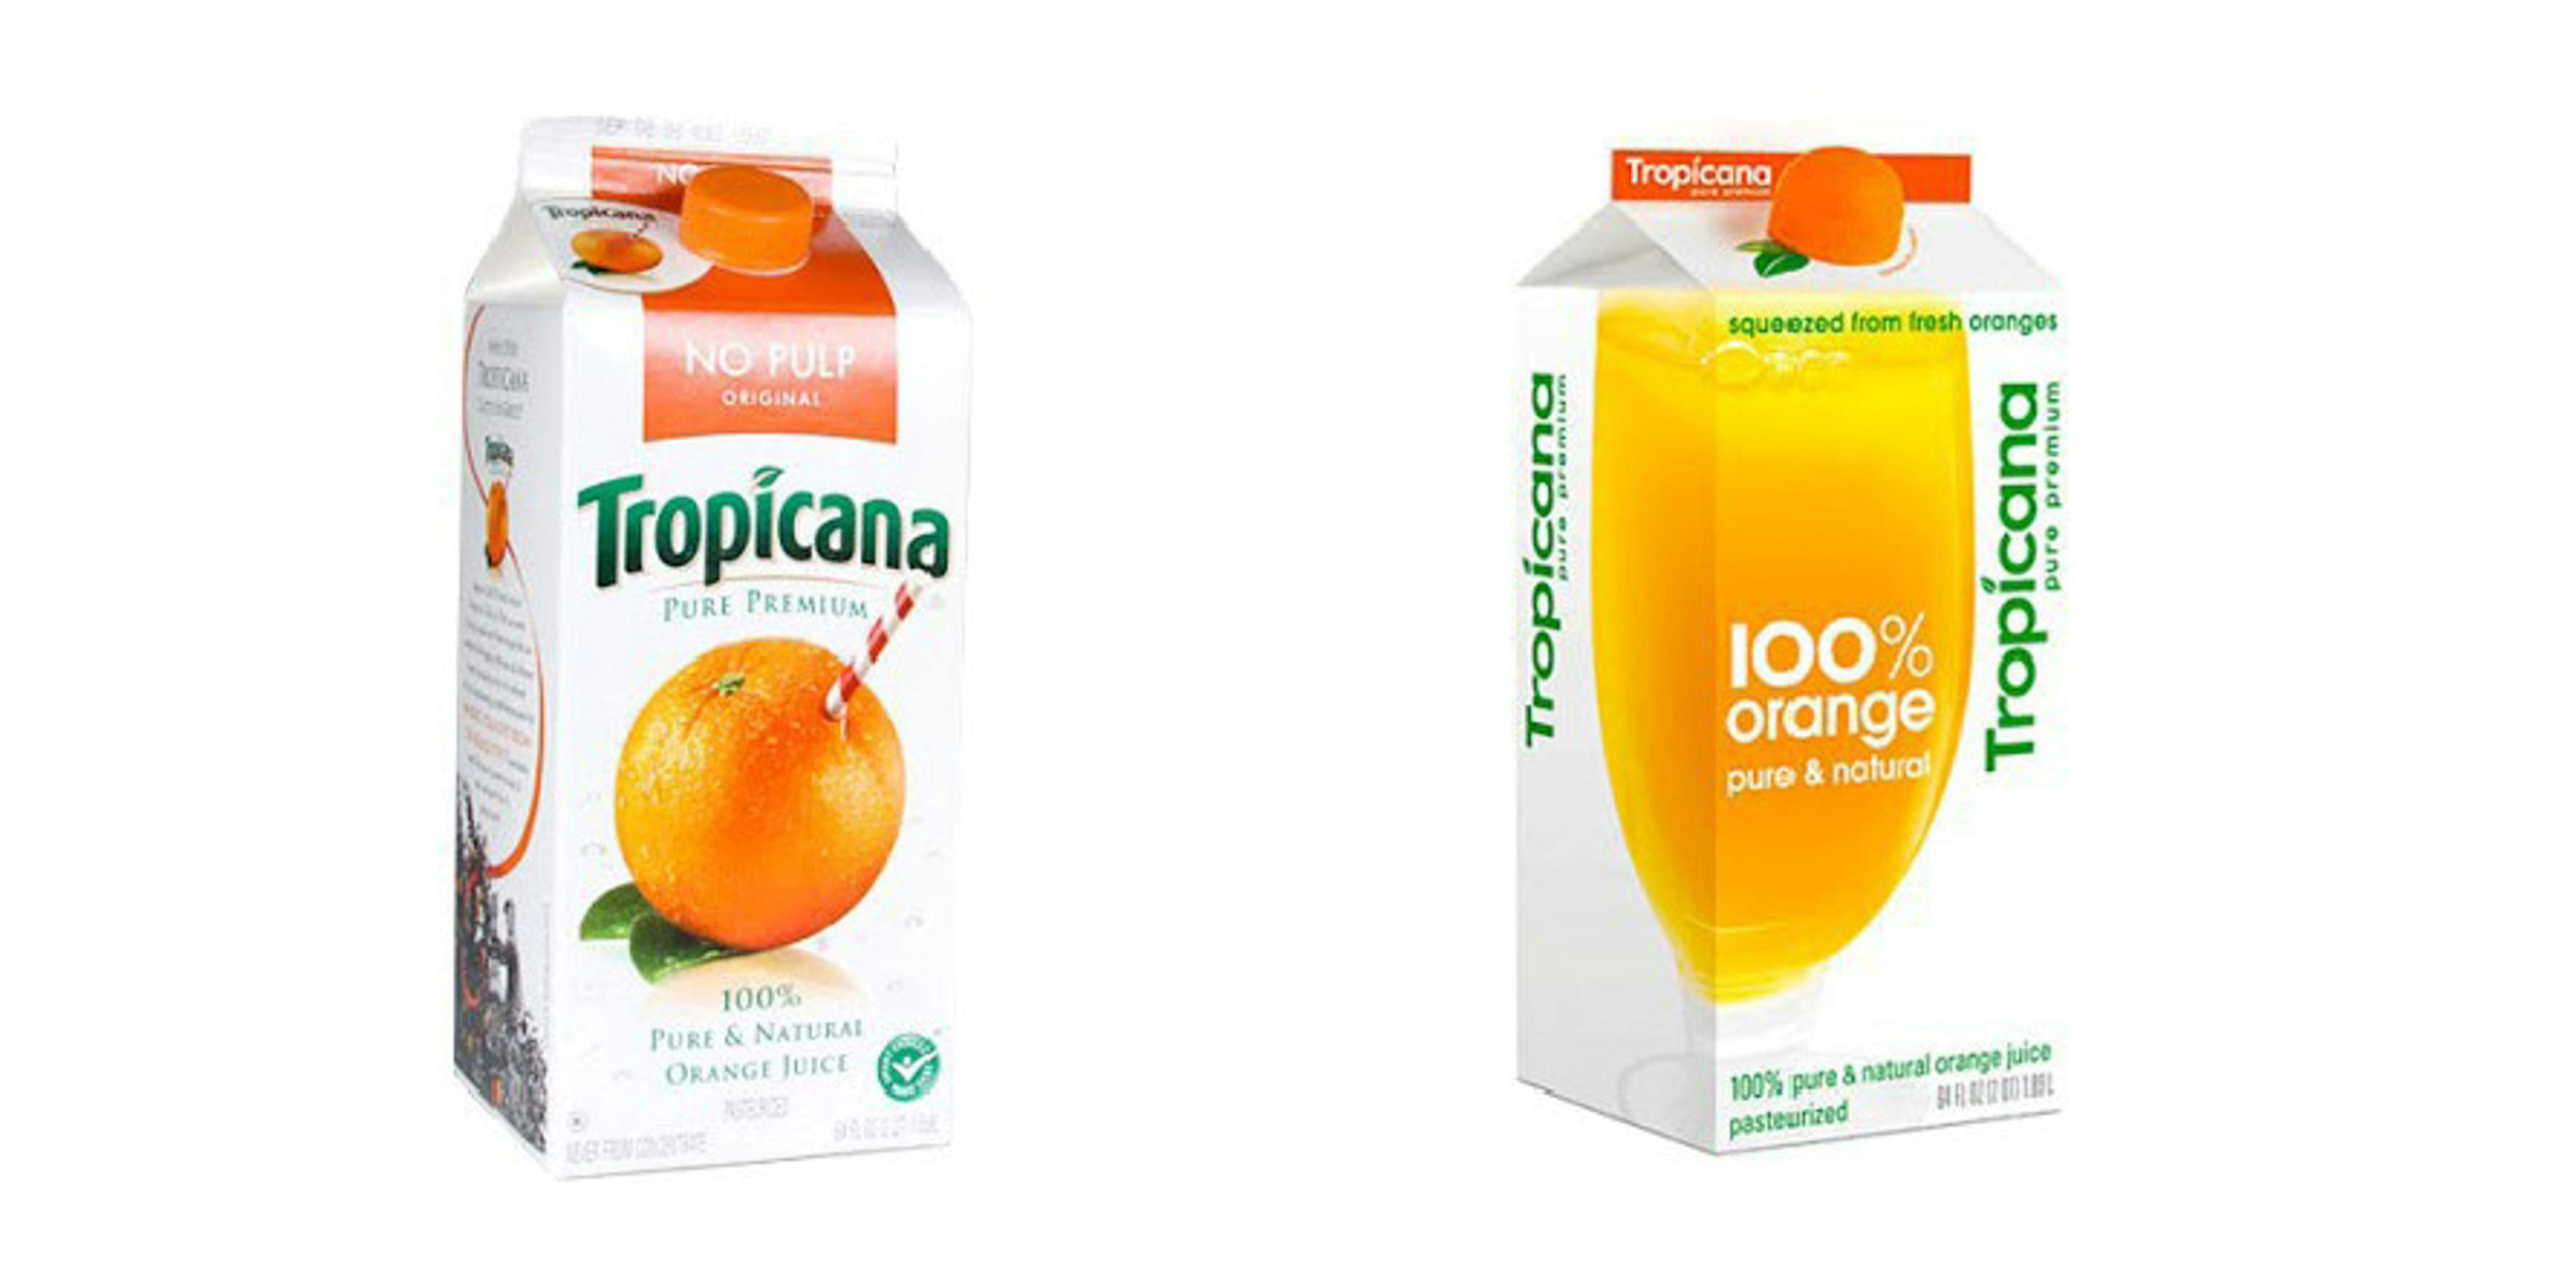 Two cartons of Tropicana orange juice on a white background, one labeled 'No Pulp Original' and the other '100% Orange Pure & Natural'.